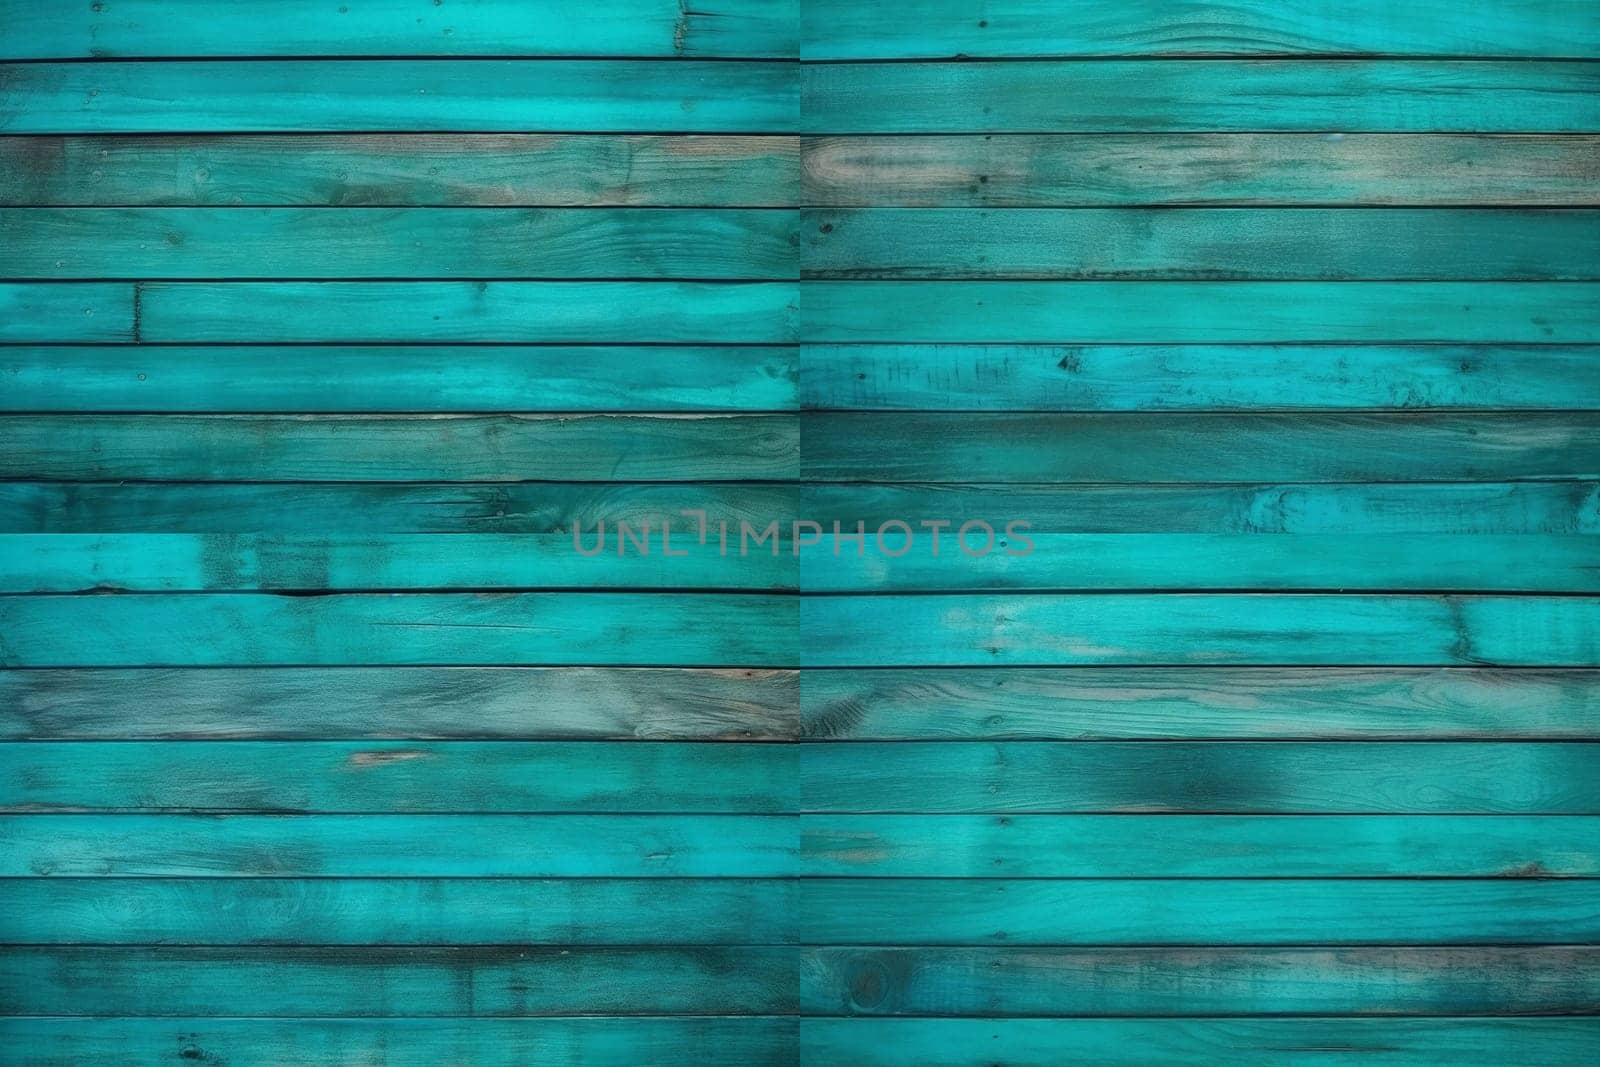 Blue Aqua color. Treated wooden boards - wood decking flooring and wood deck with paneled walls. Textures and patterns of natural wood. Background for interiors. High quality image